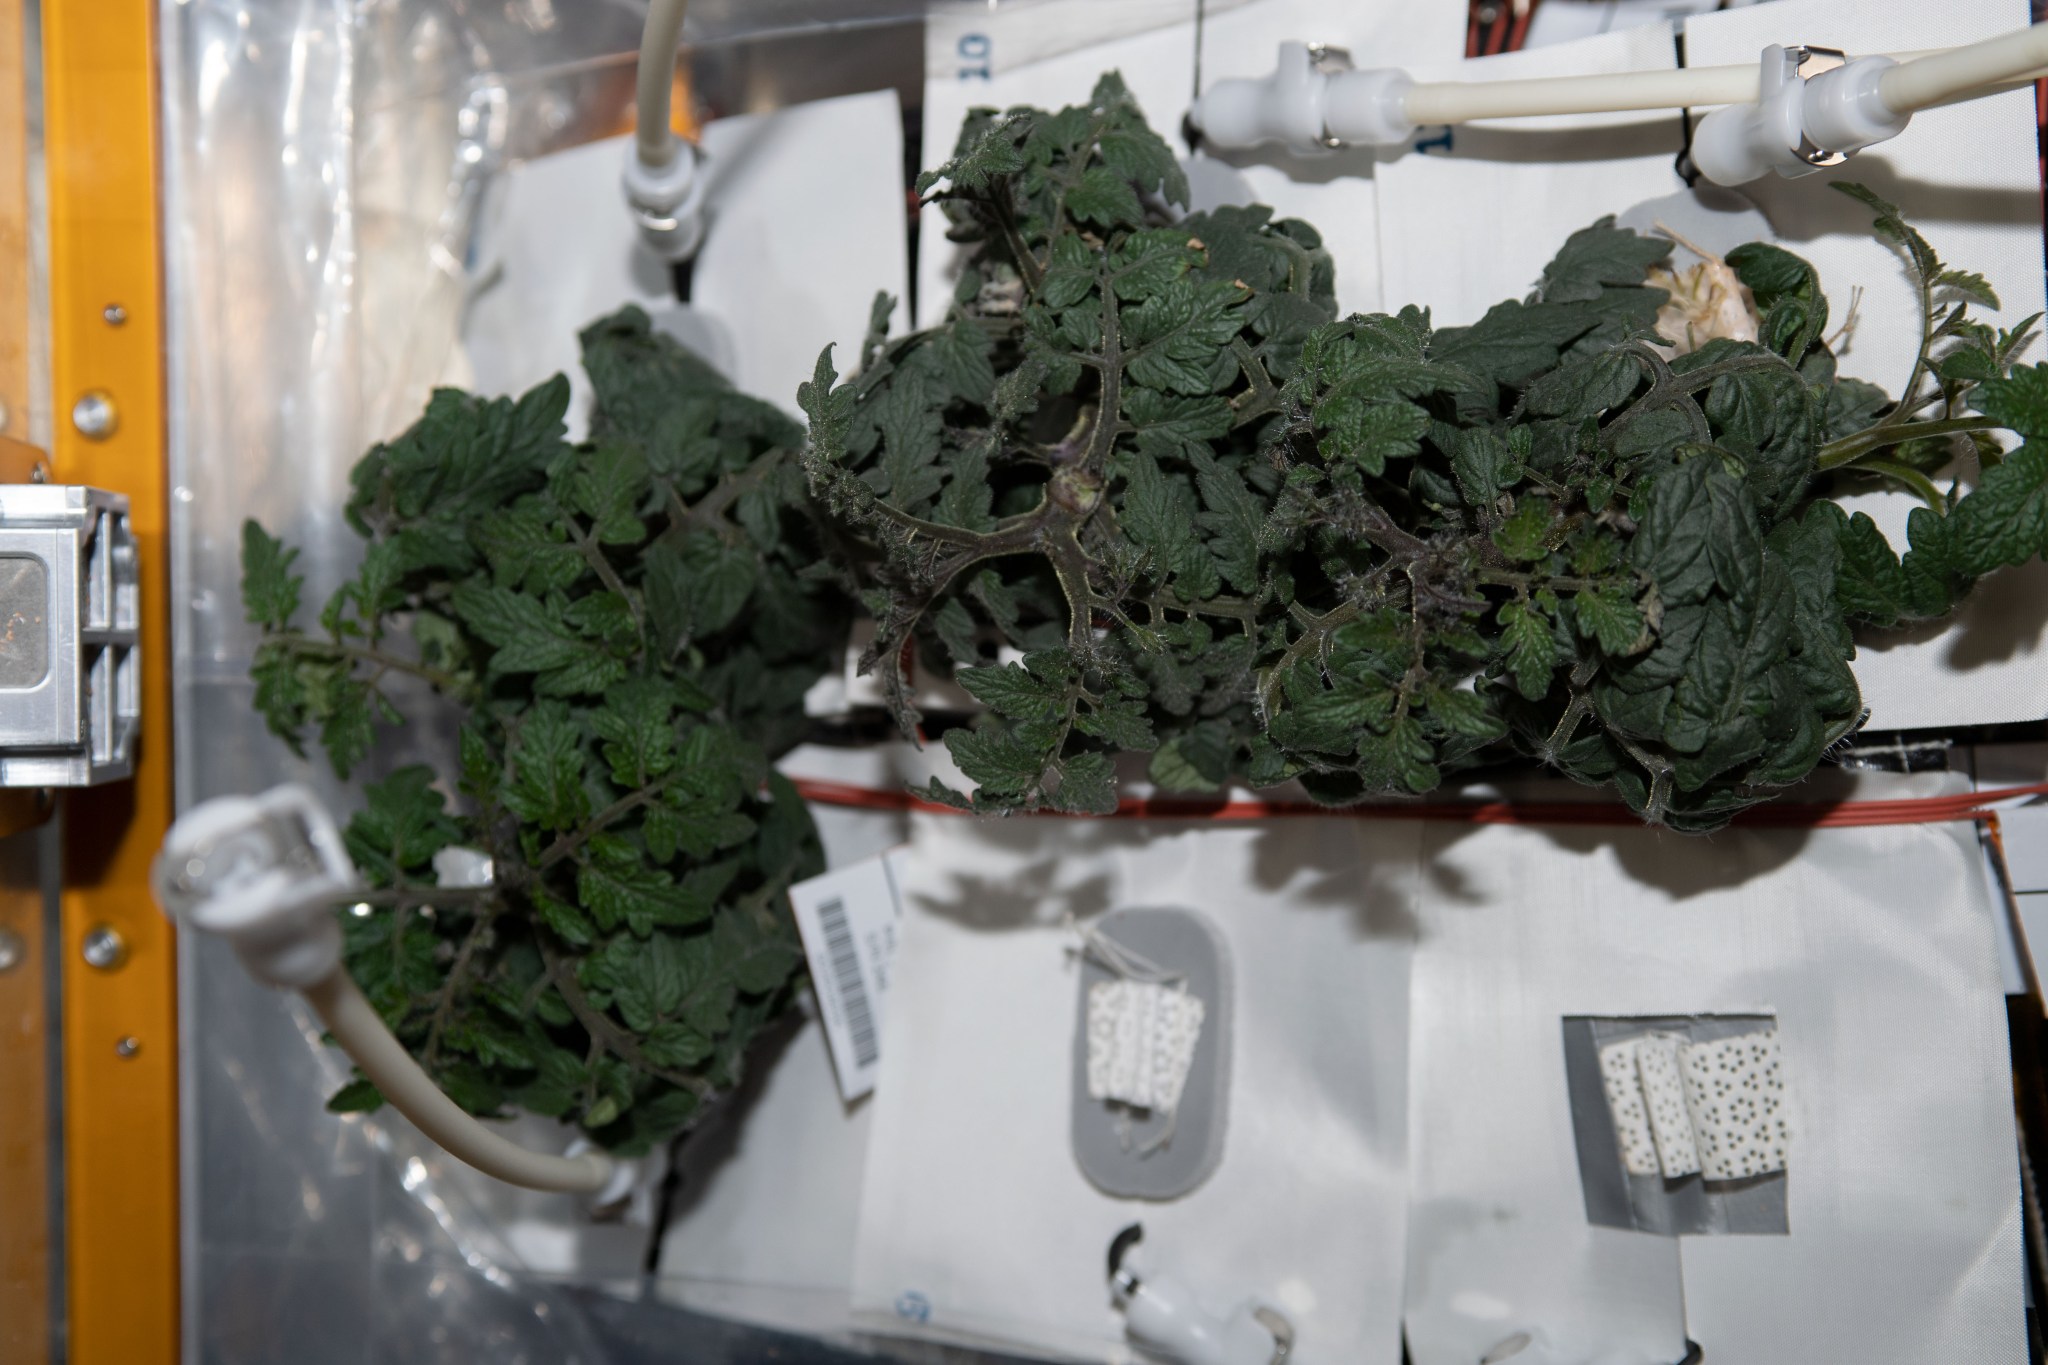 Tomato plants growing on the International Space Station. HRF Veg examines the behavioral health benefits for astronauts from having live plants such as these and fresh food in space.